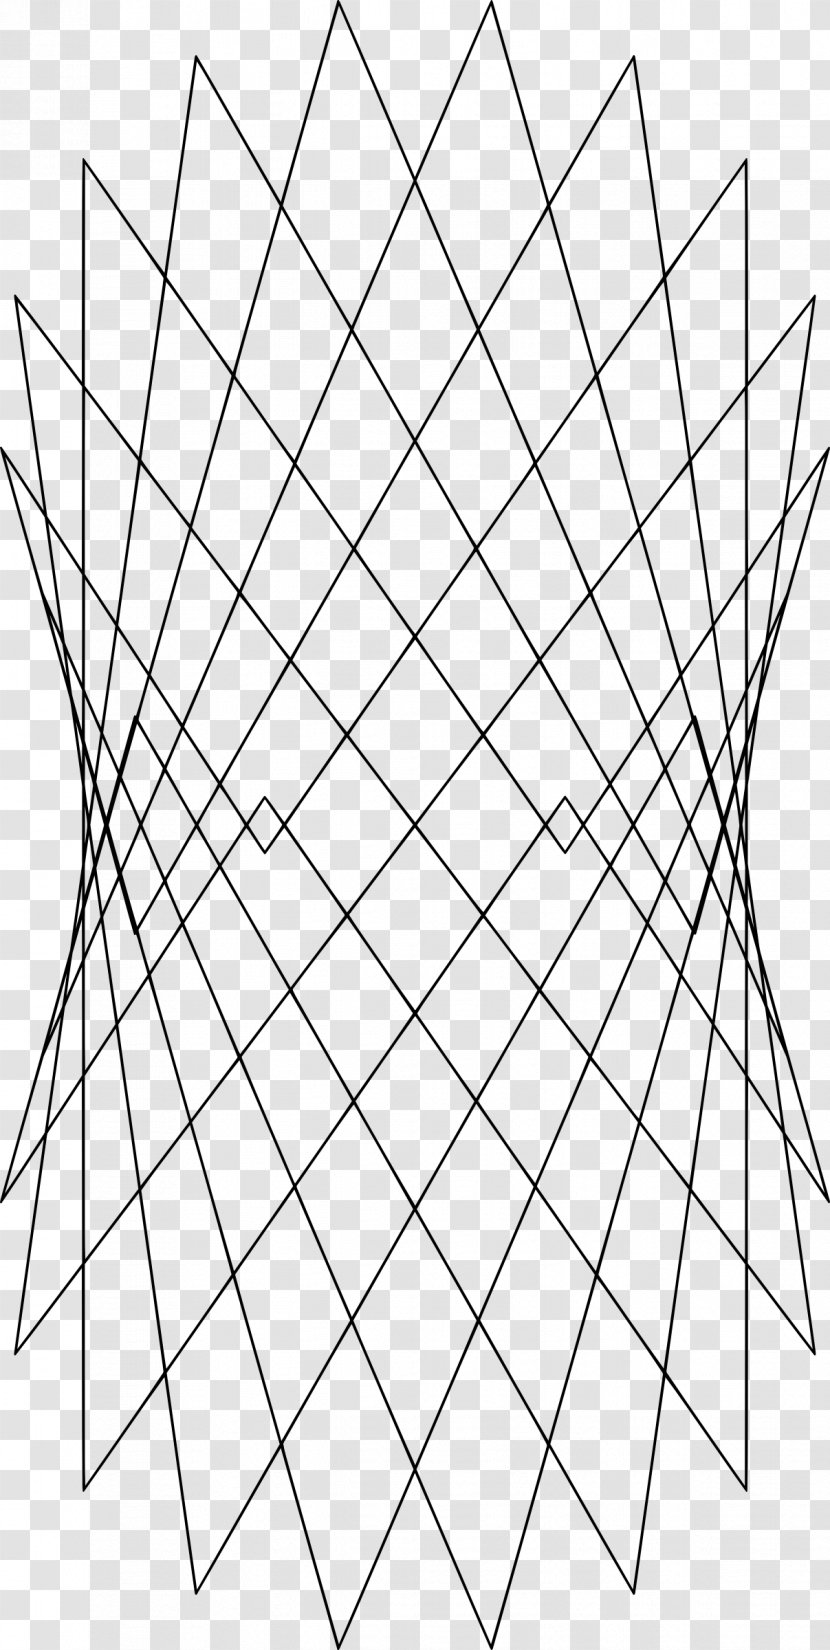 Drawing Pattern - Line Art - Black And White Transparent PNG